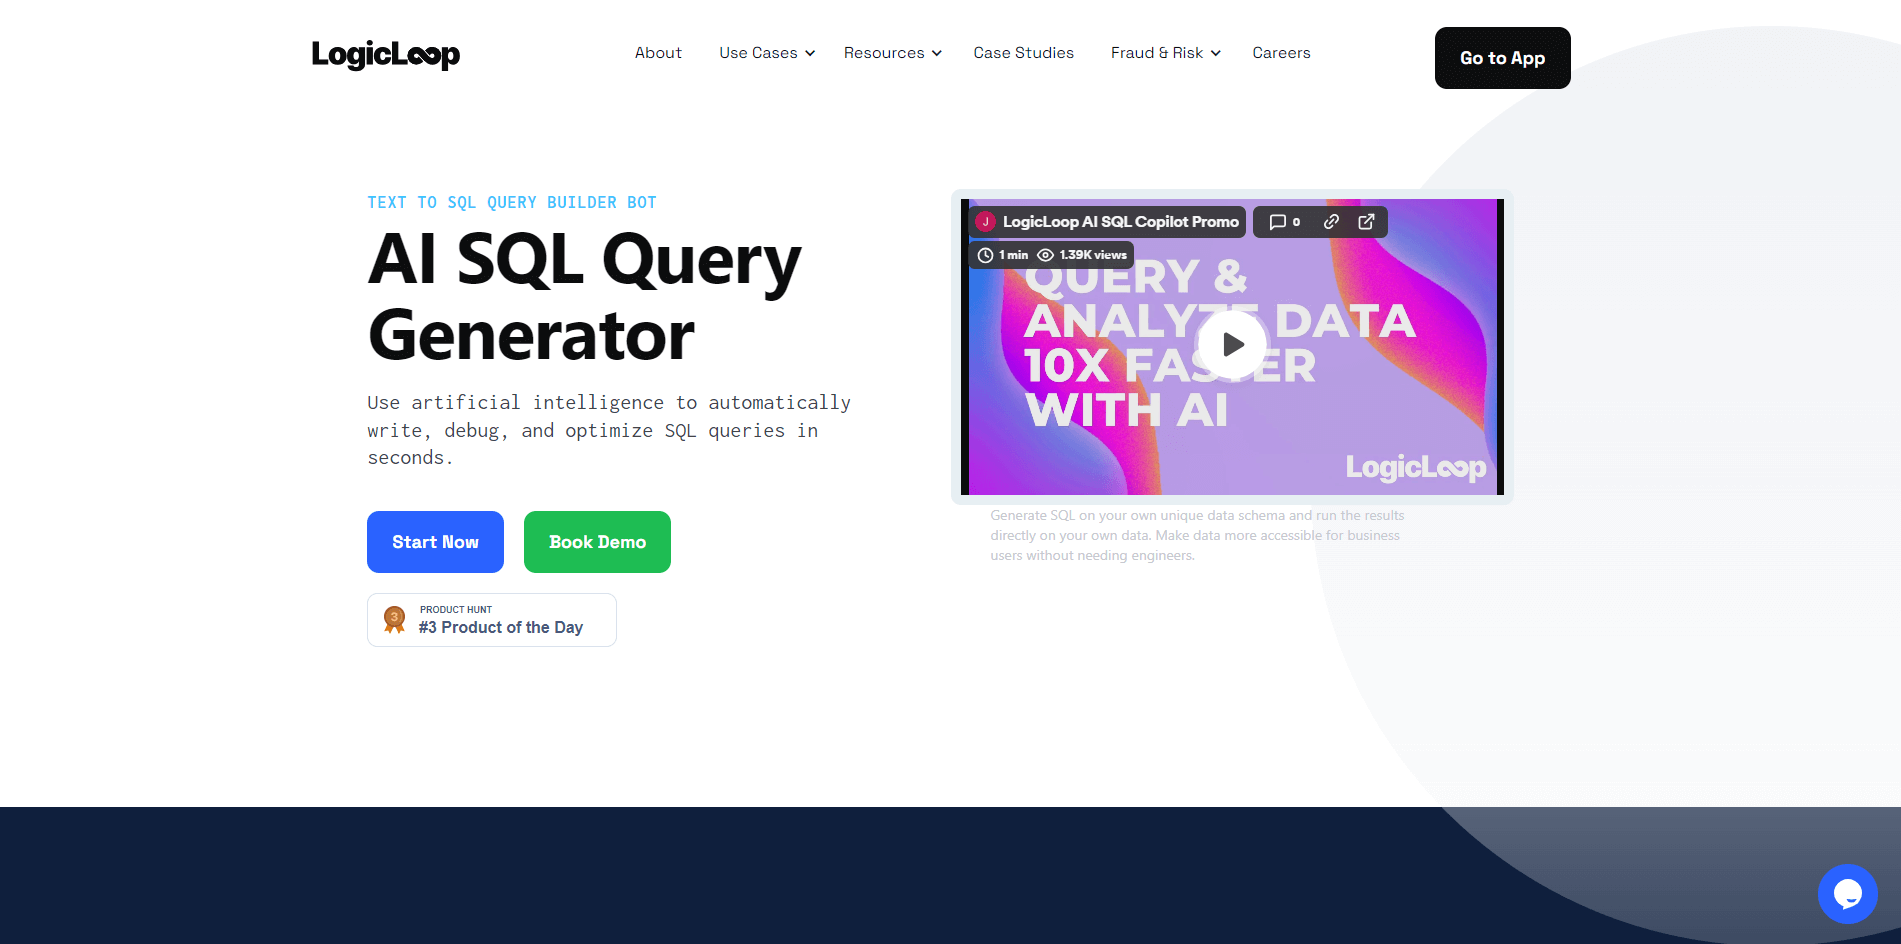 logicloop.com | Use artificial intelligence to automatically write, debug, and optimize SQL queries in seconds.